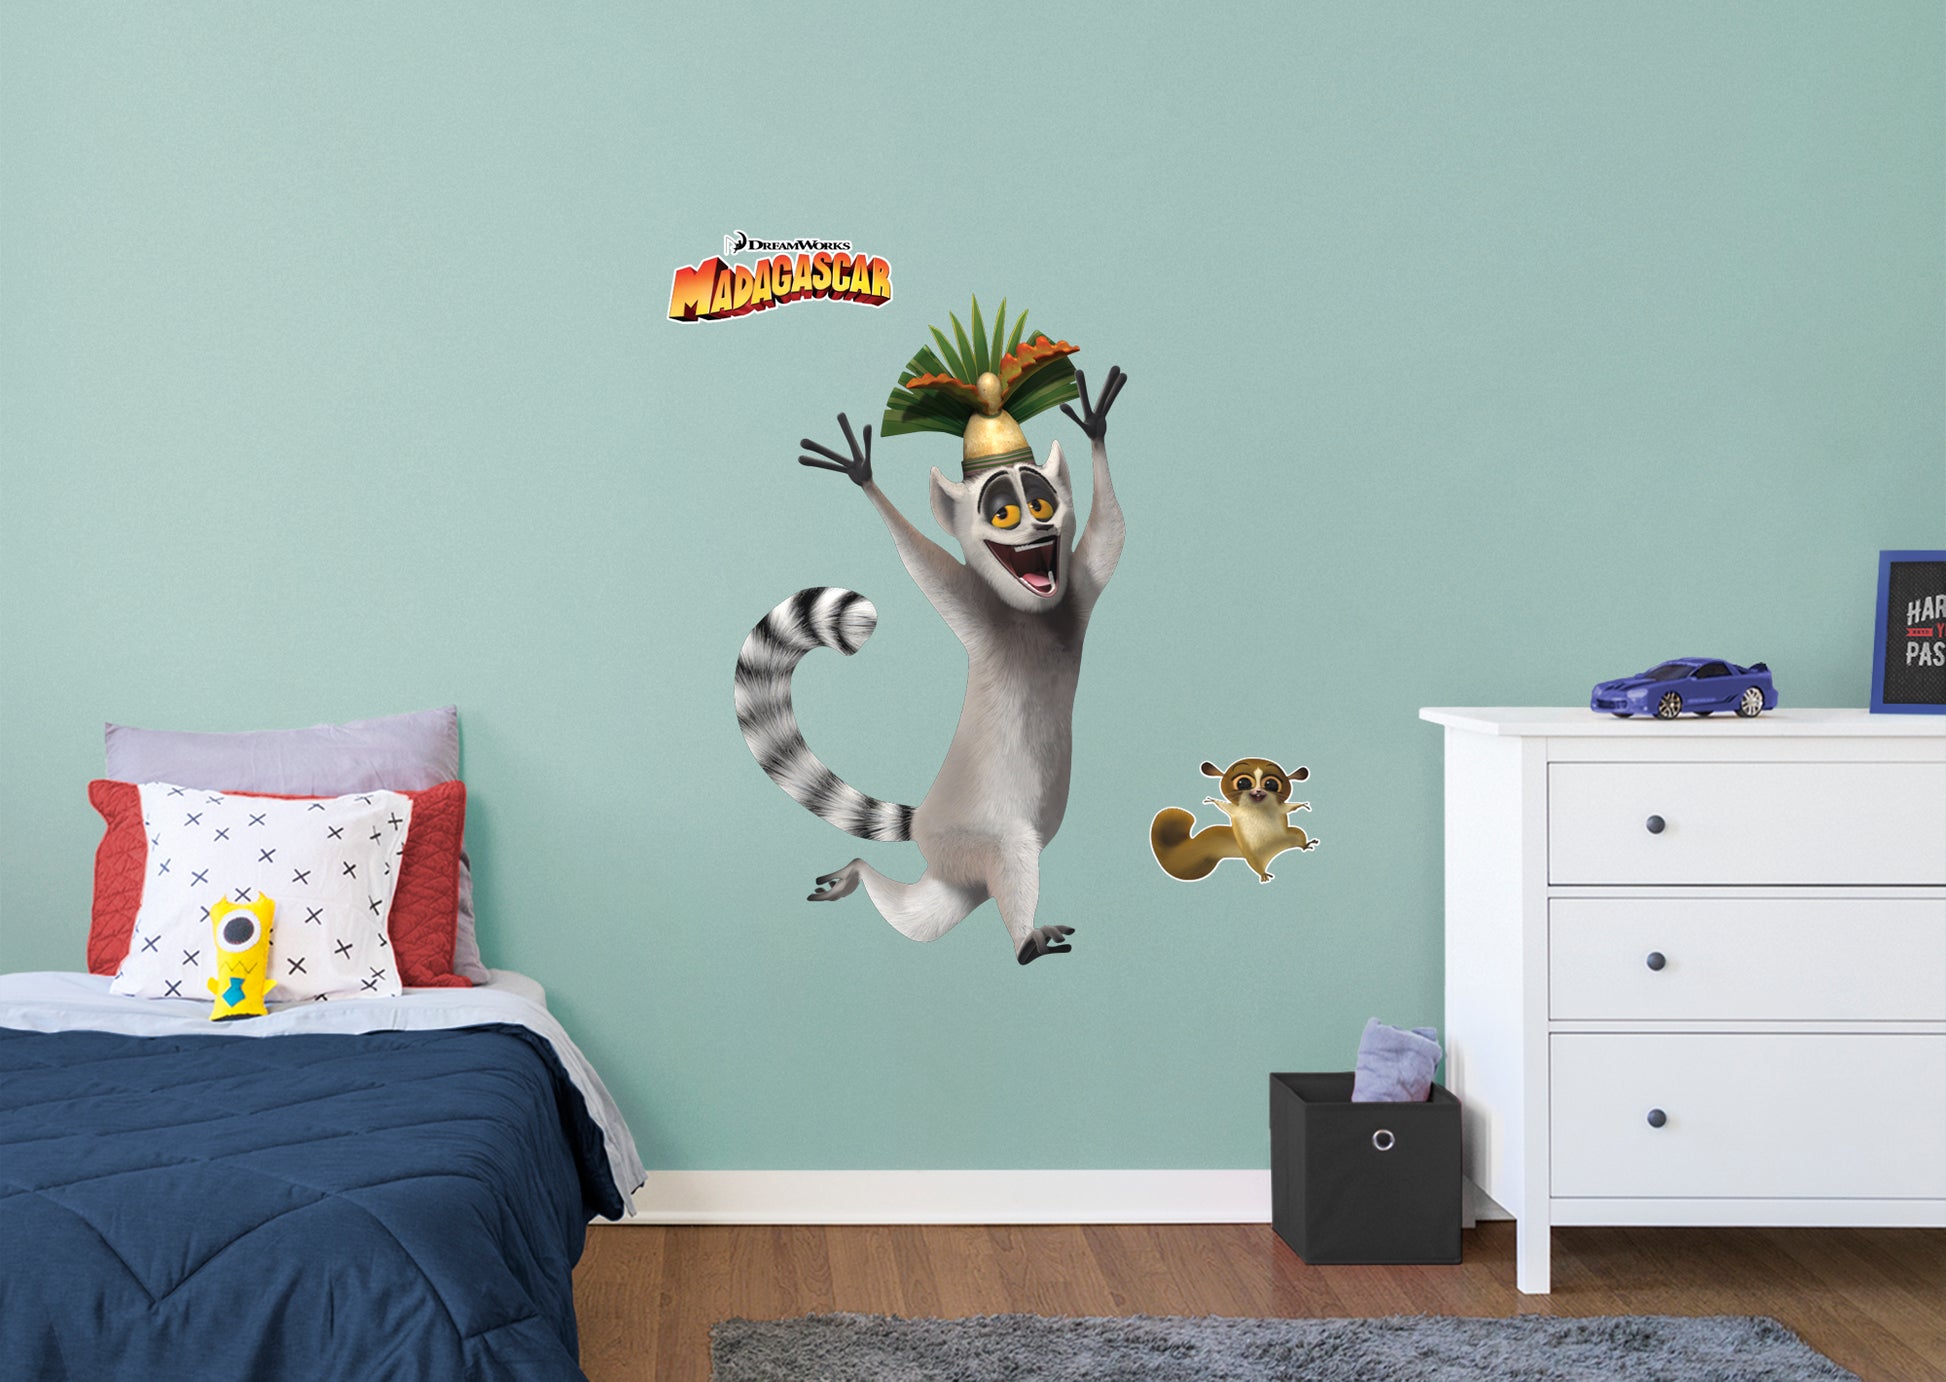 Giant Character +2 Decals  (29"W x 51"H)